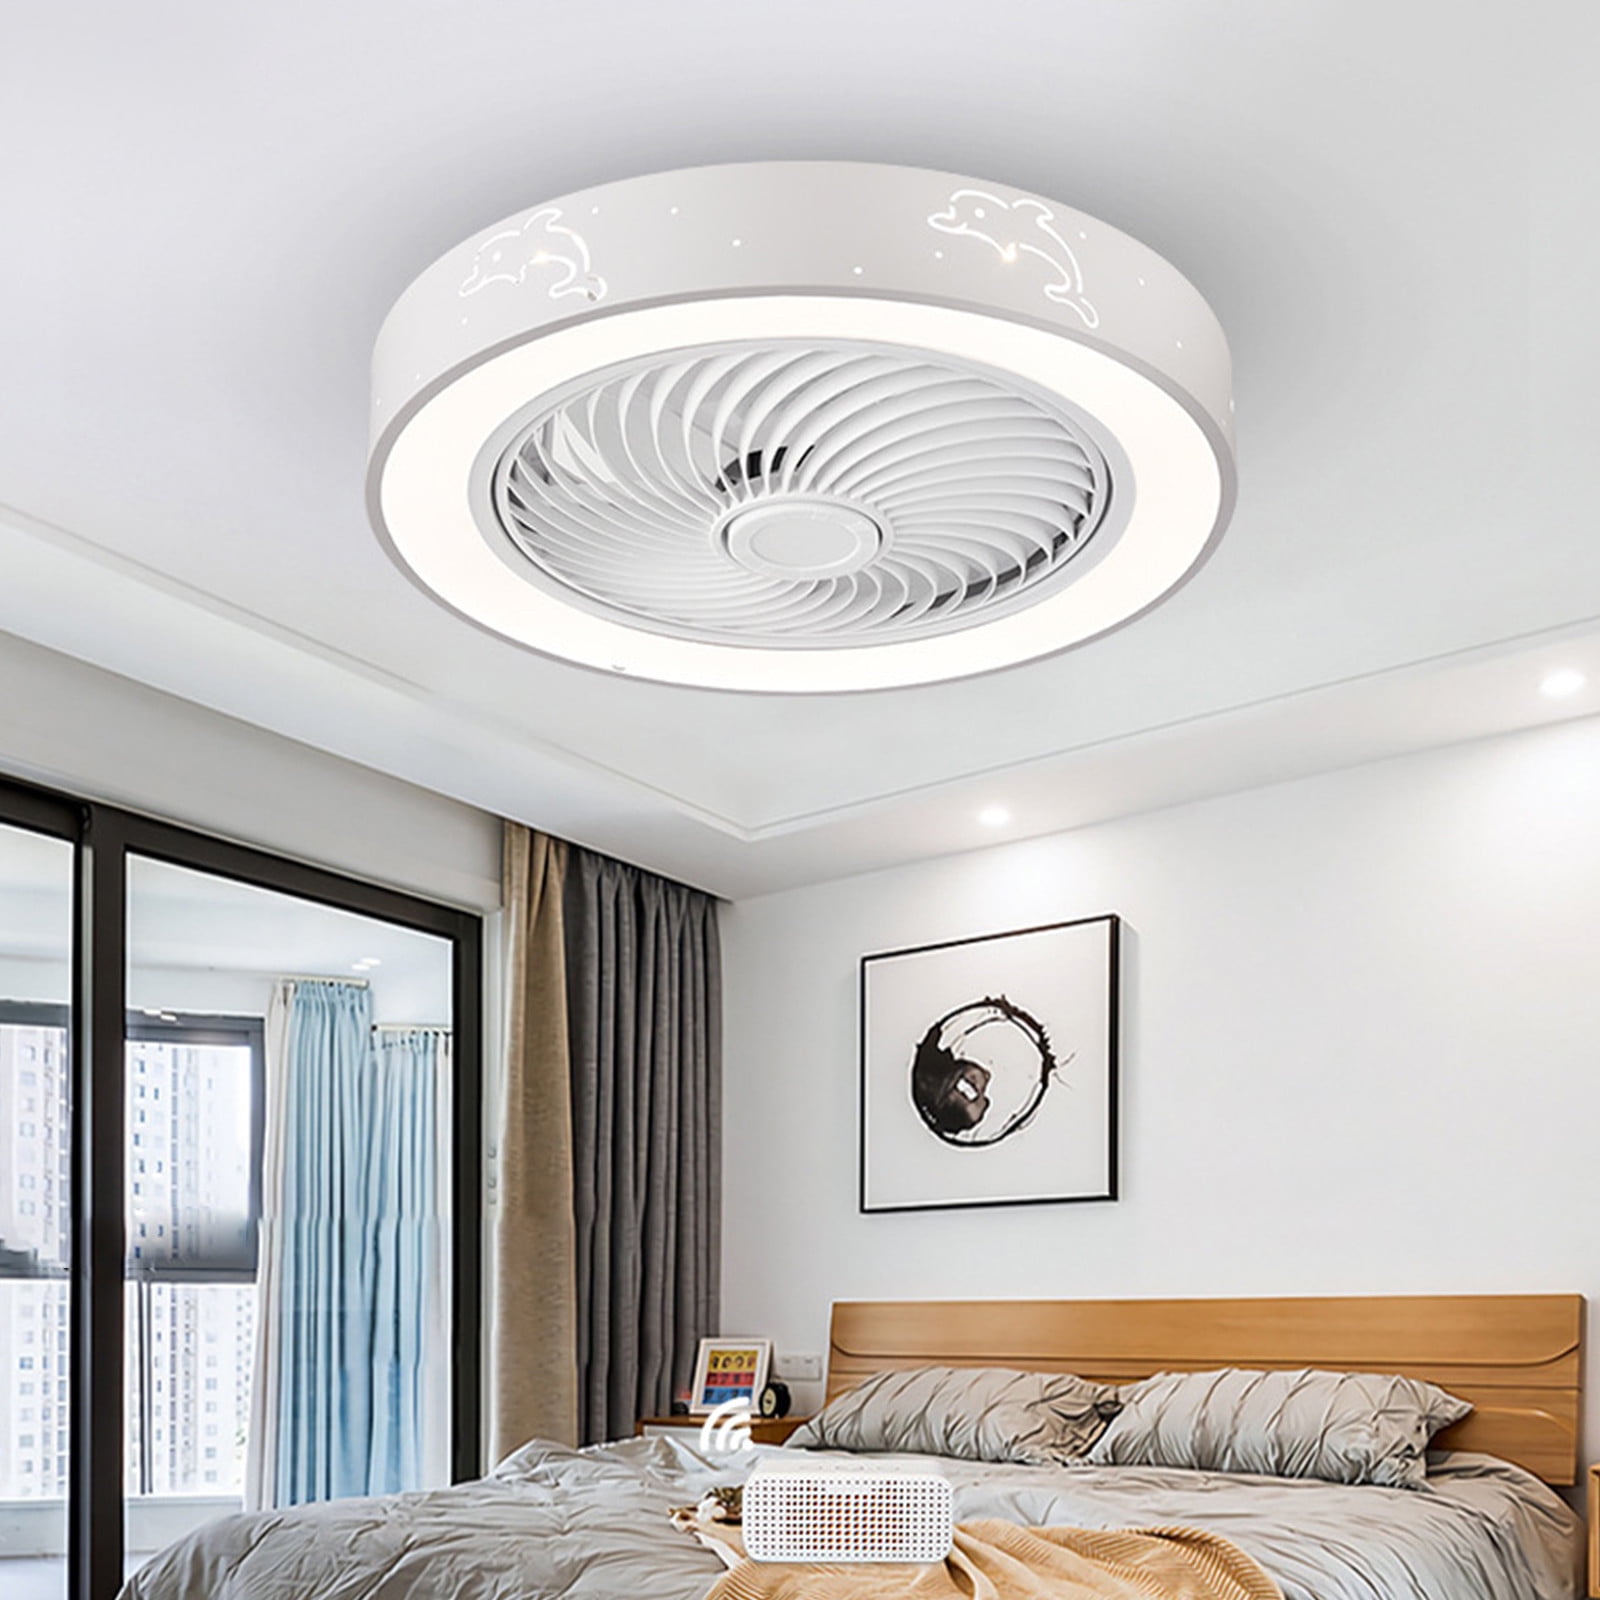 Sdjma 19 7 Modern Ceiling Fans With Light 30w Led Dimmable Remote Invisible Blades Semi Flush Mount Fan 3 Sd Indoor Low Profile For Home Bedroom Kitchen Com